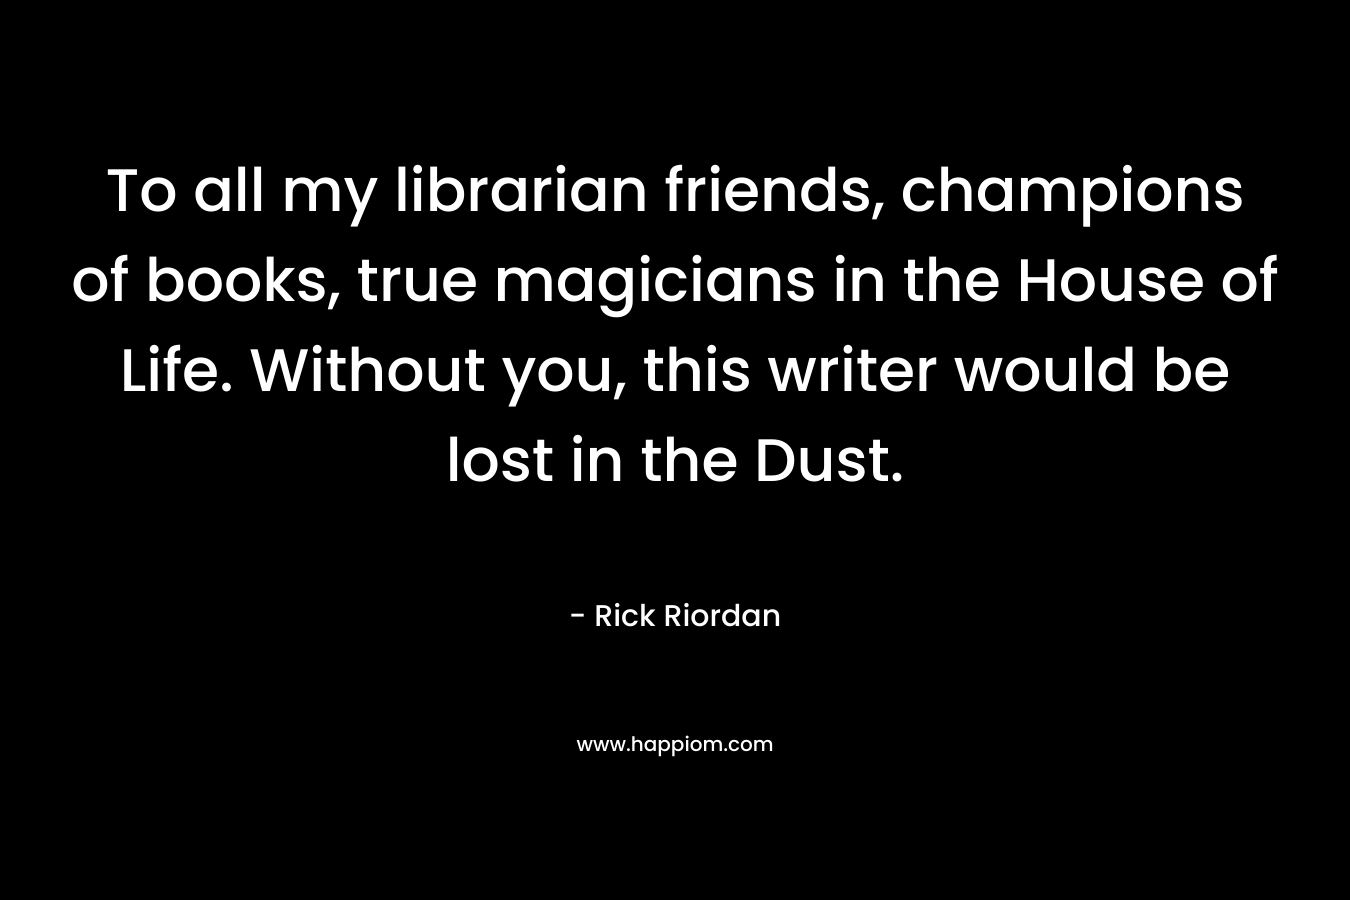 To all my librarian friends, champions of books, true magicians in the House of Life. Without you, this writer would be lost in the Dust. – Rick Riordan